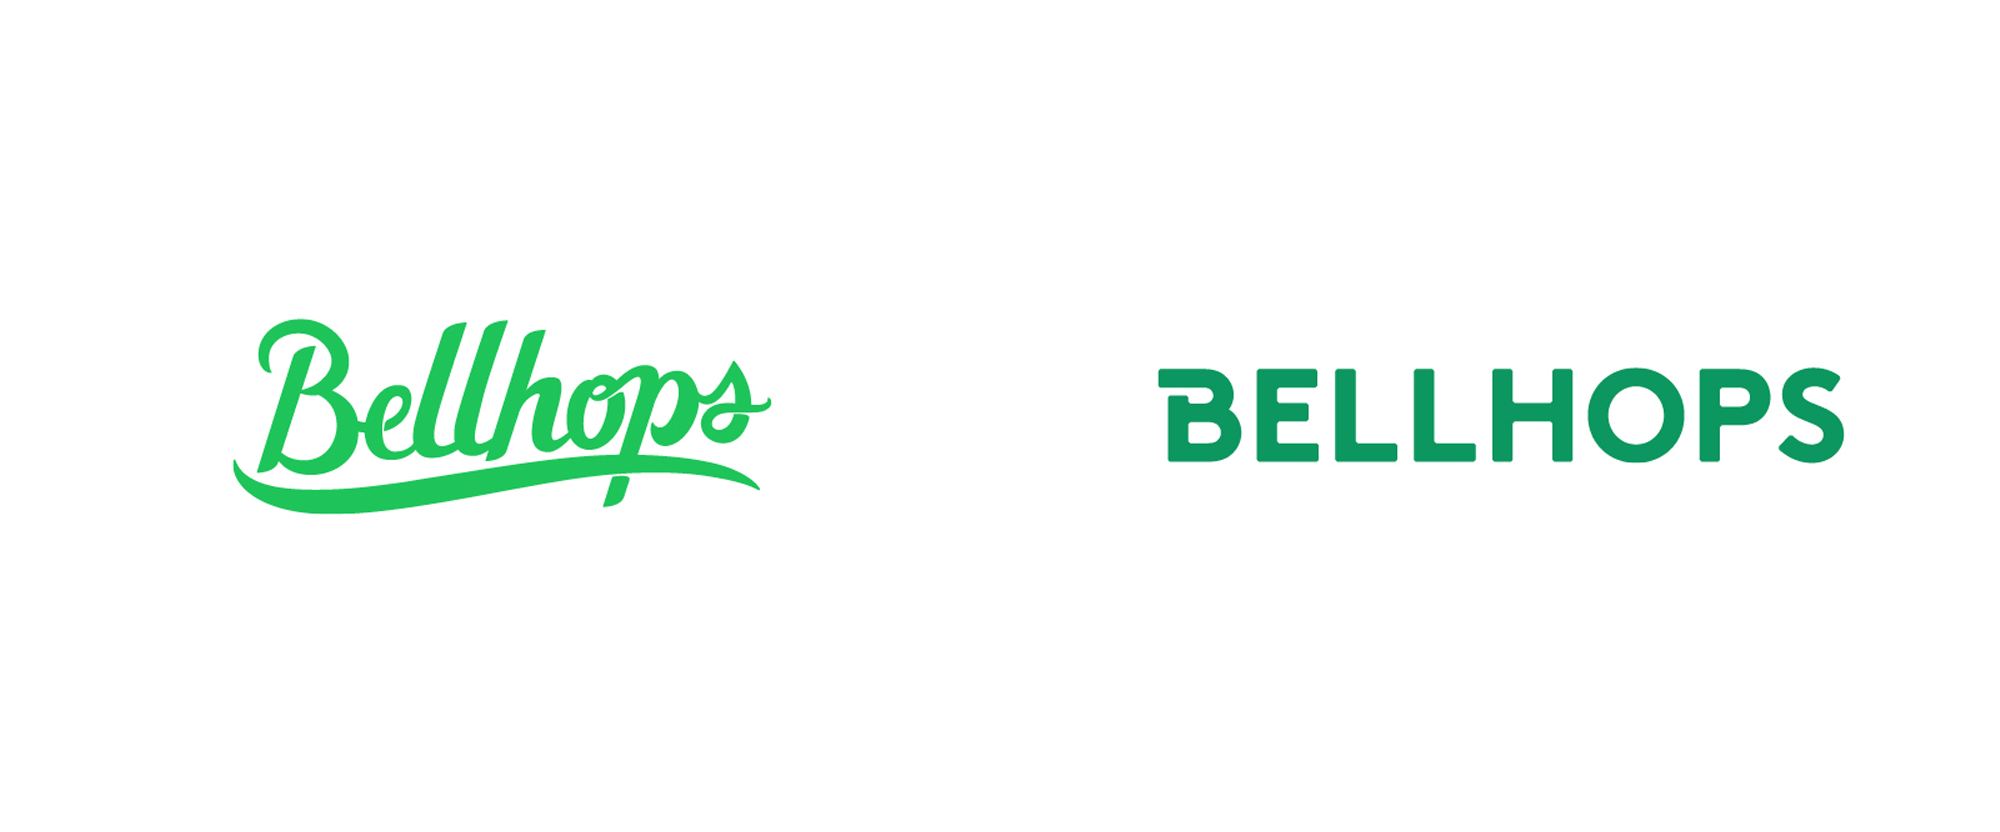 New Logo and Identity for Bellhops by Gin Lane